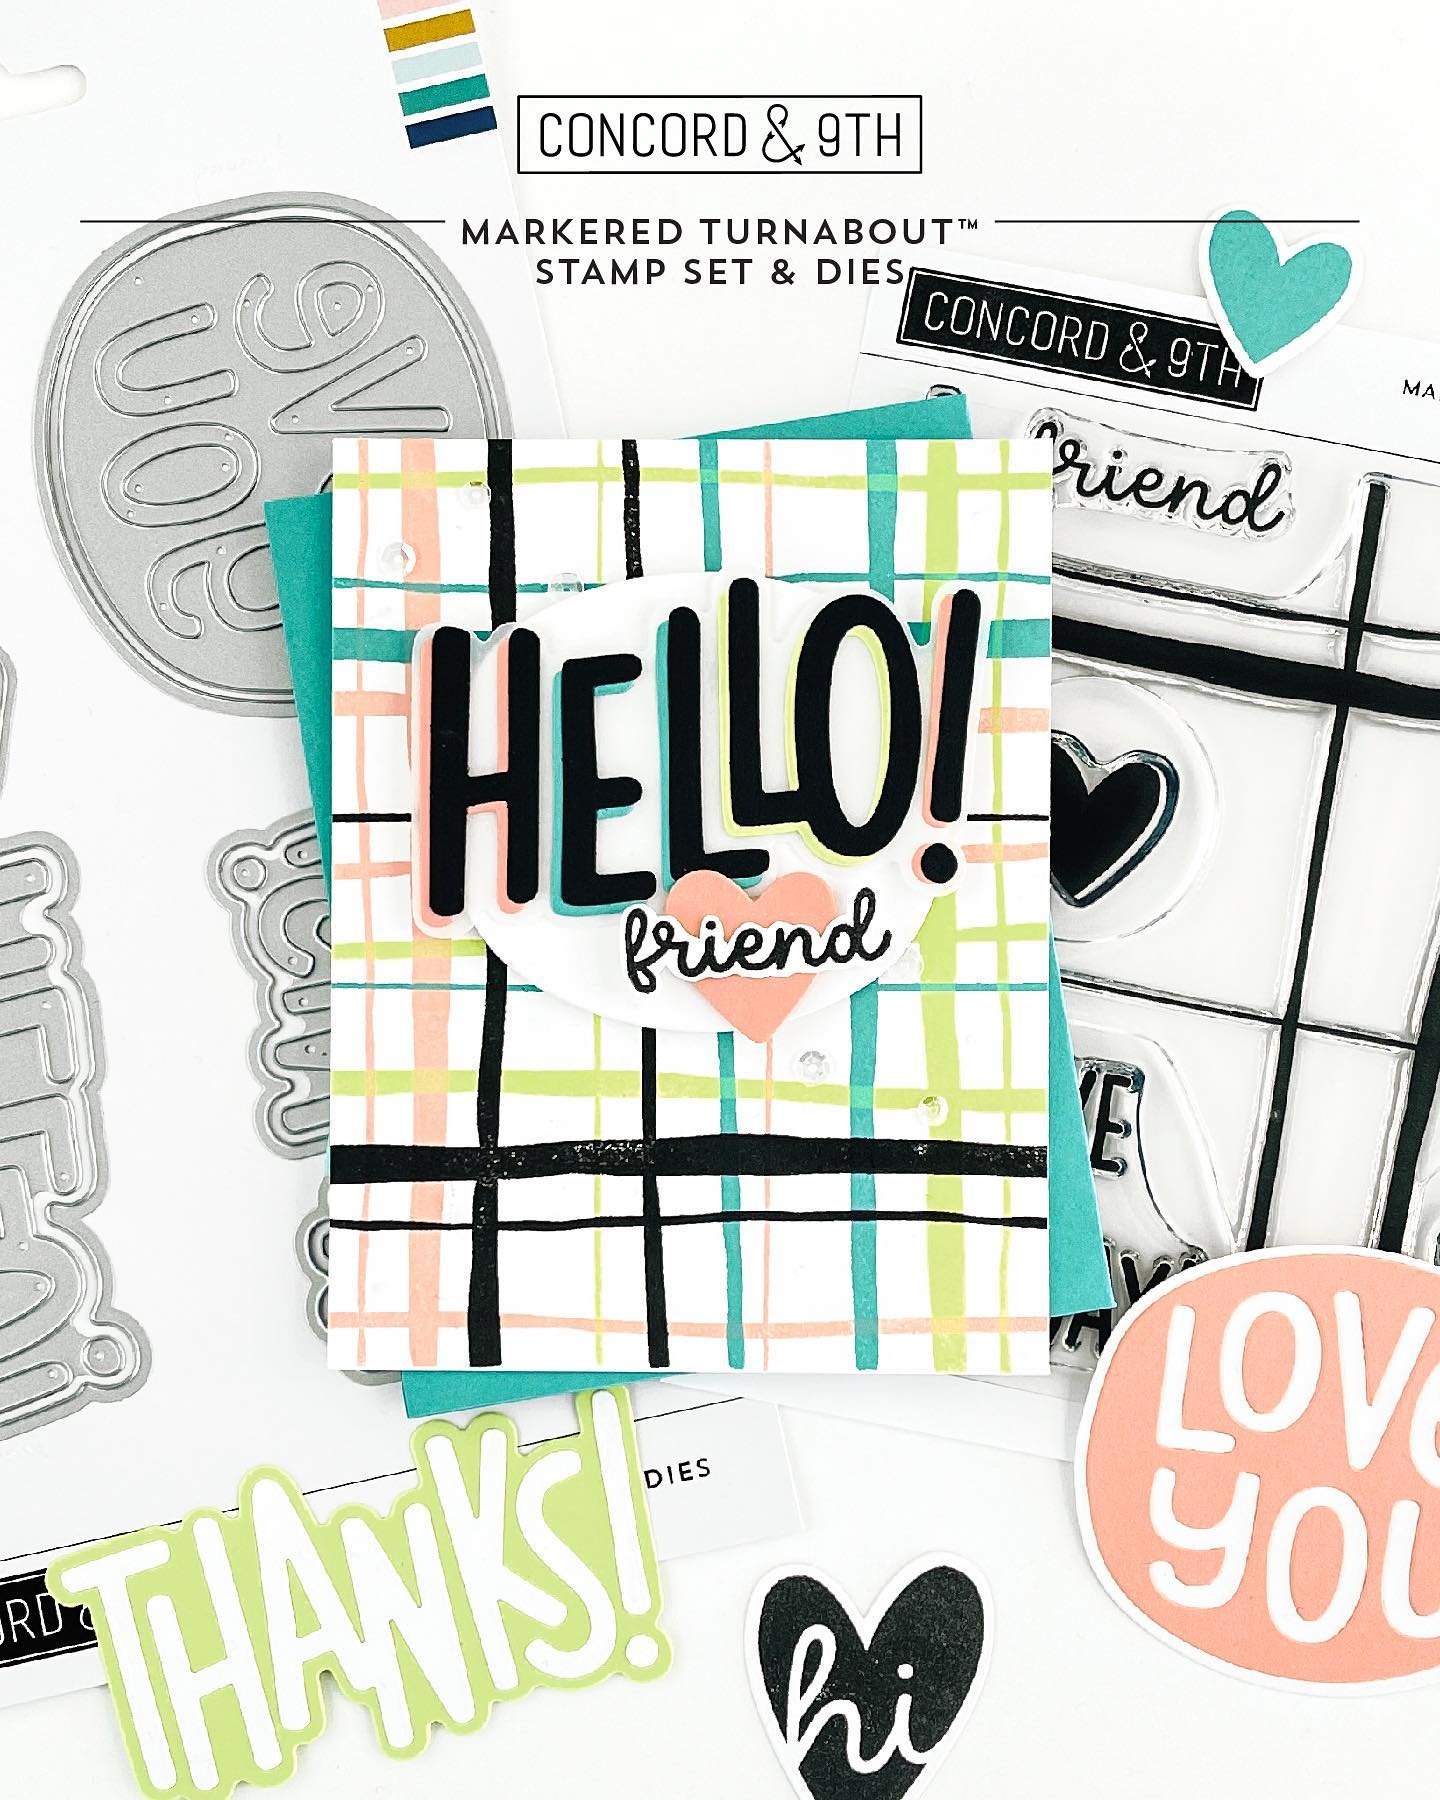 CONCORD & 9 th : Markered | Turnabout | Stamp